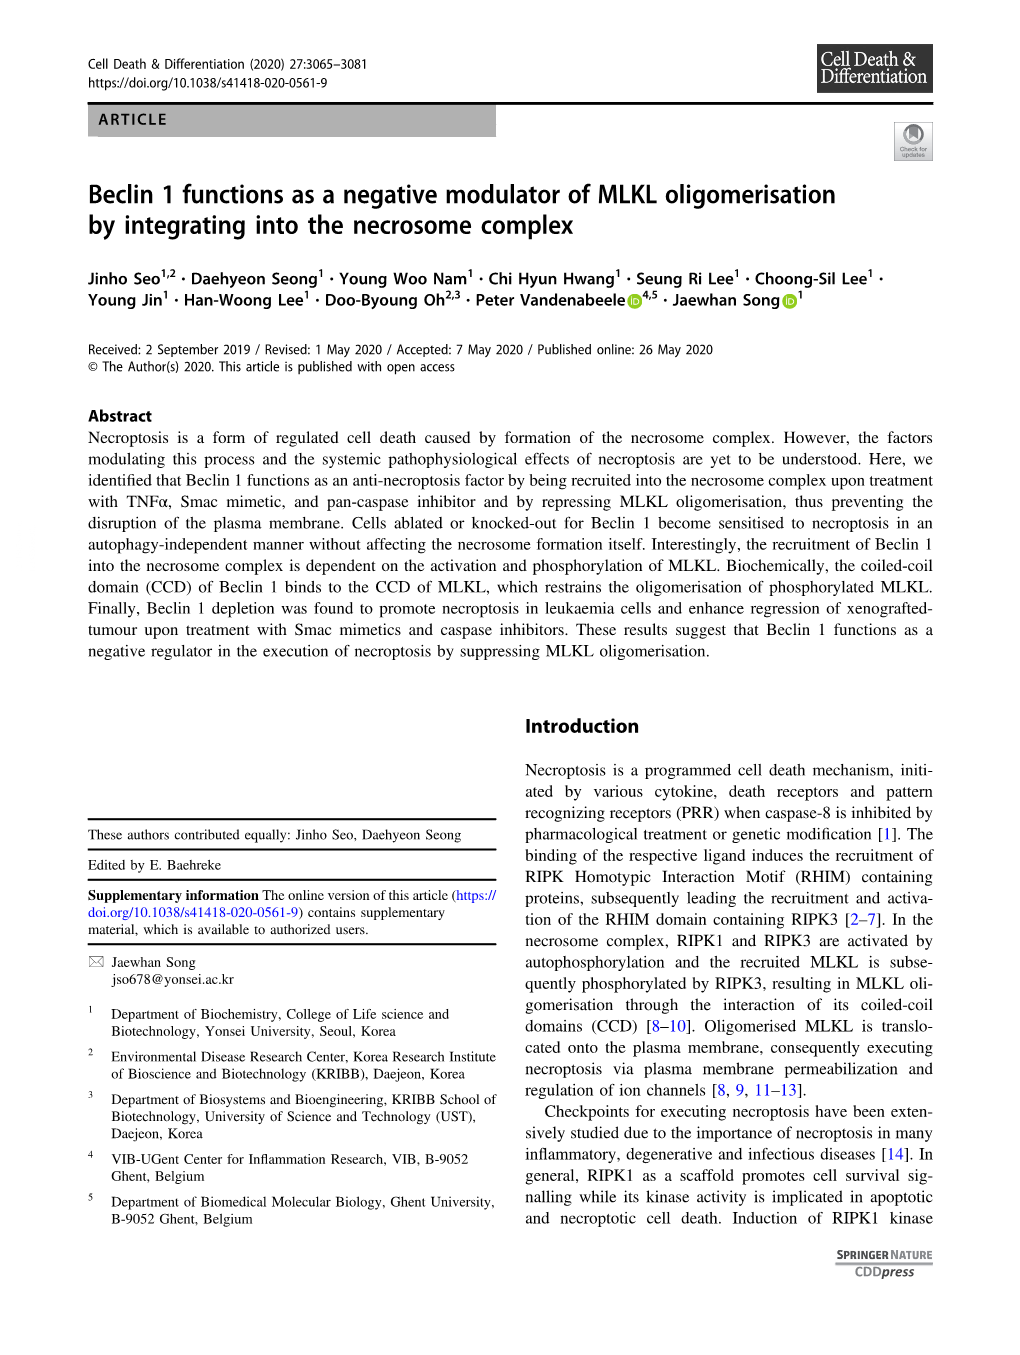 Beclin 1 Functions As a Negative Modulator of MLKL Oligomerisation by Integrating Into the Necrosome Complex